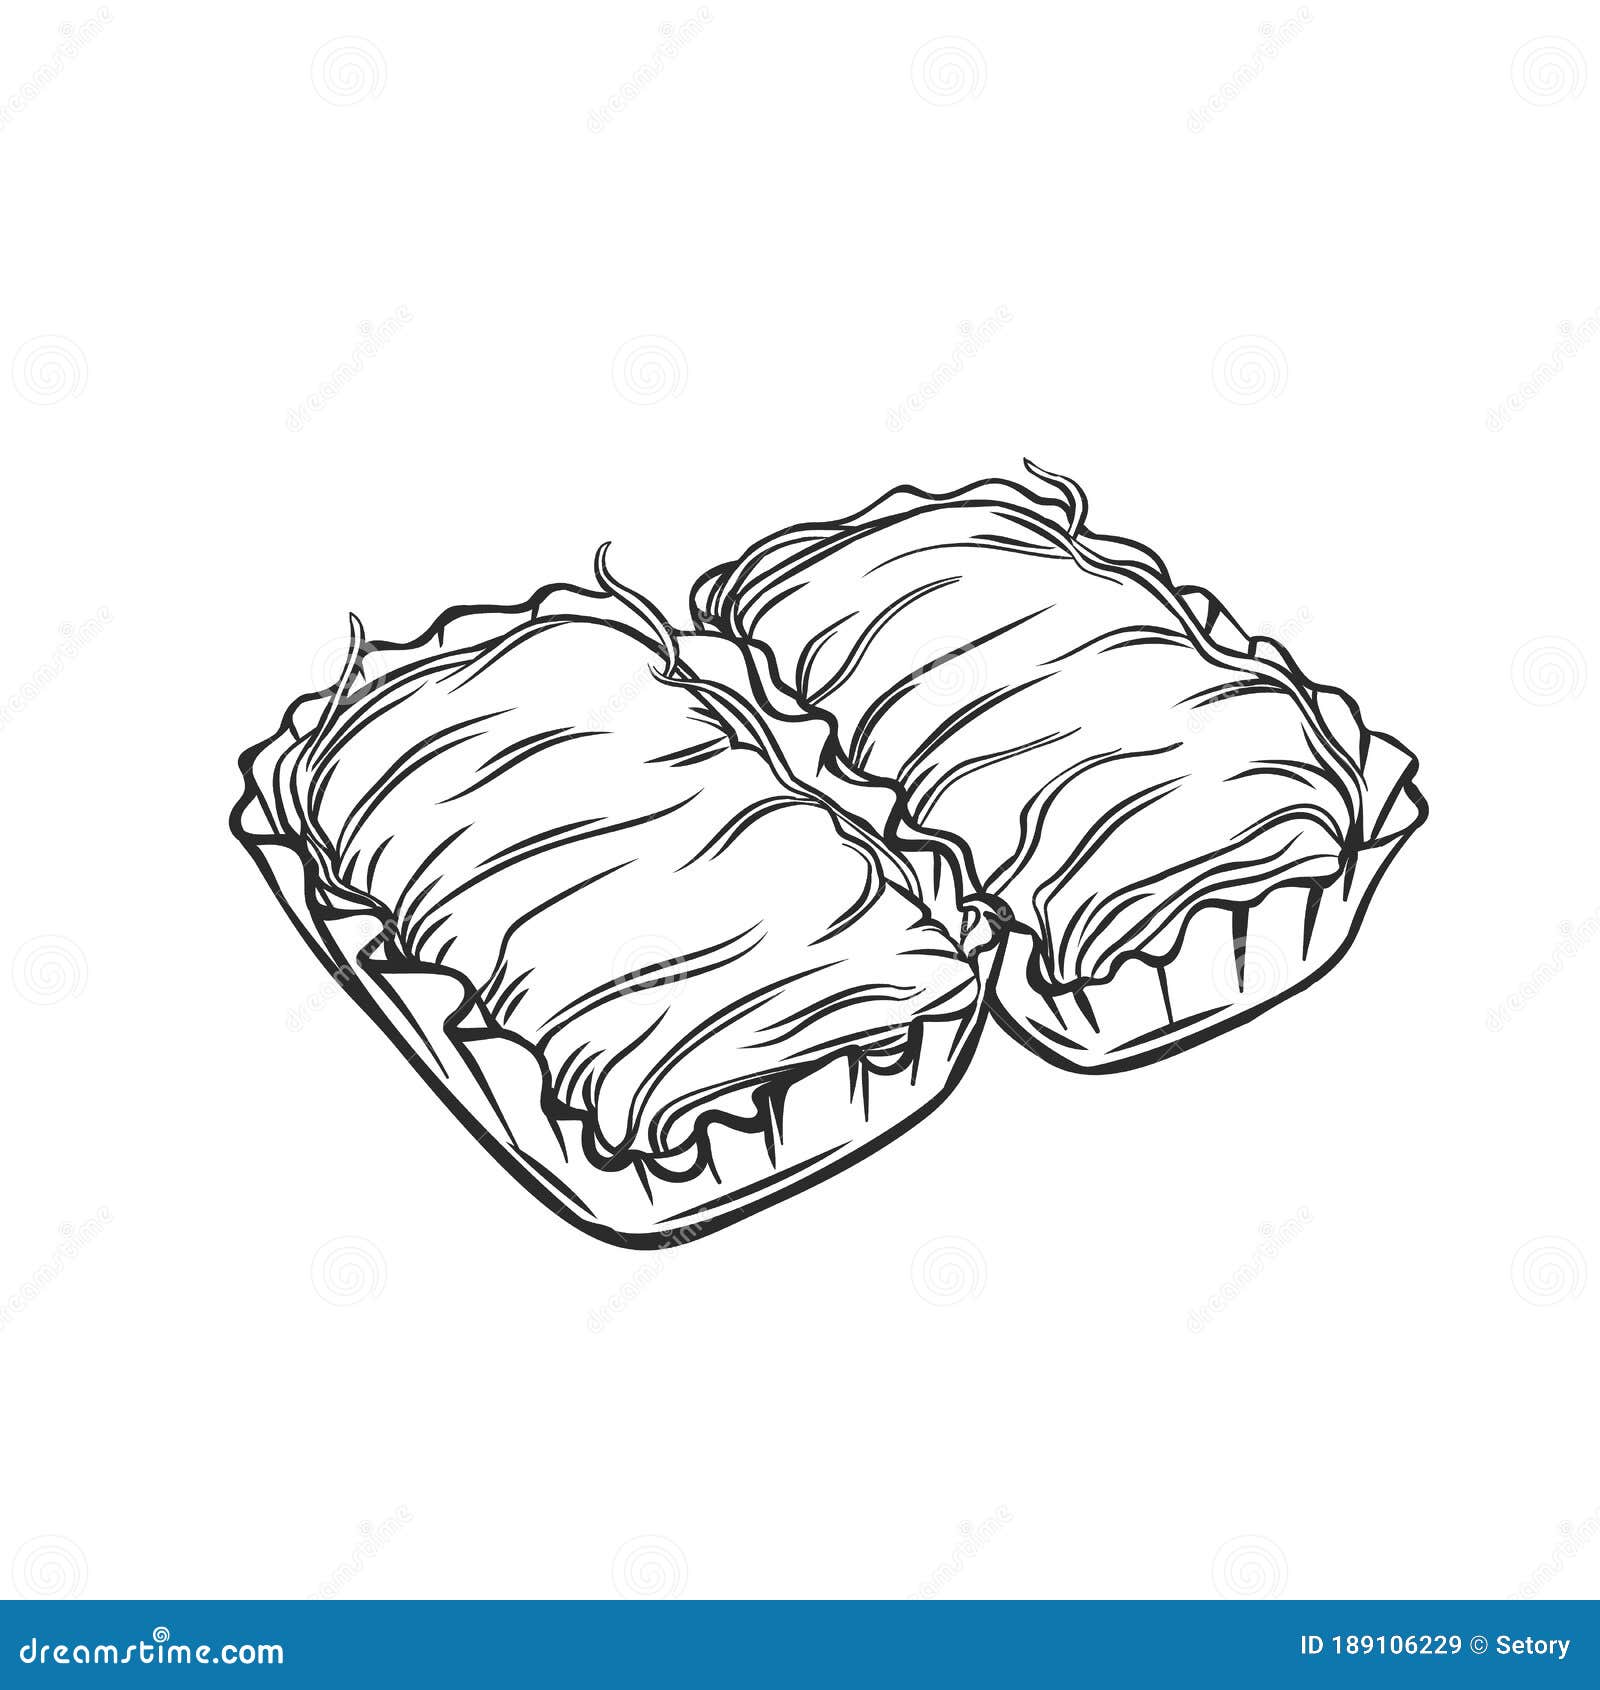 Beard Candy Stock Illustrations 1 802 Beard Candy Stock Illustrations Vectors Clipart Dreamstime